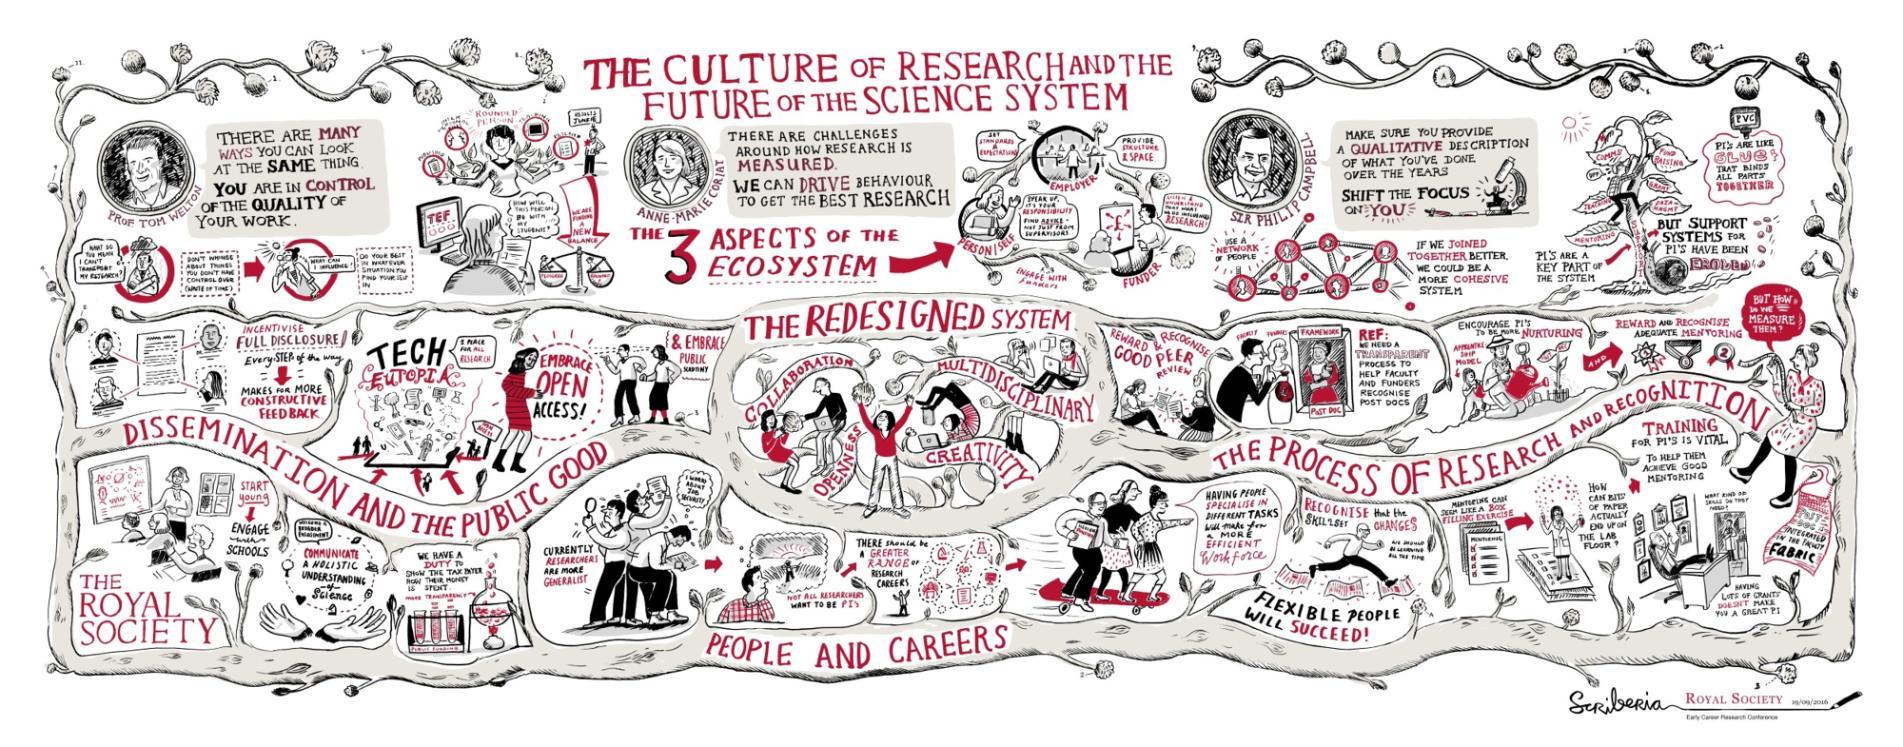 Royal_Society_Culture_of_Research_graphic